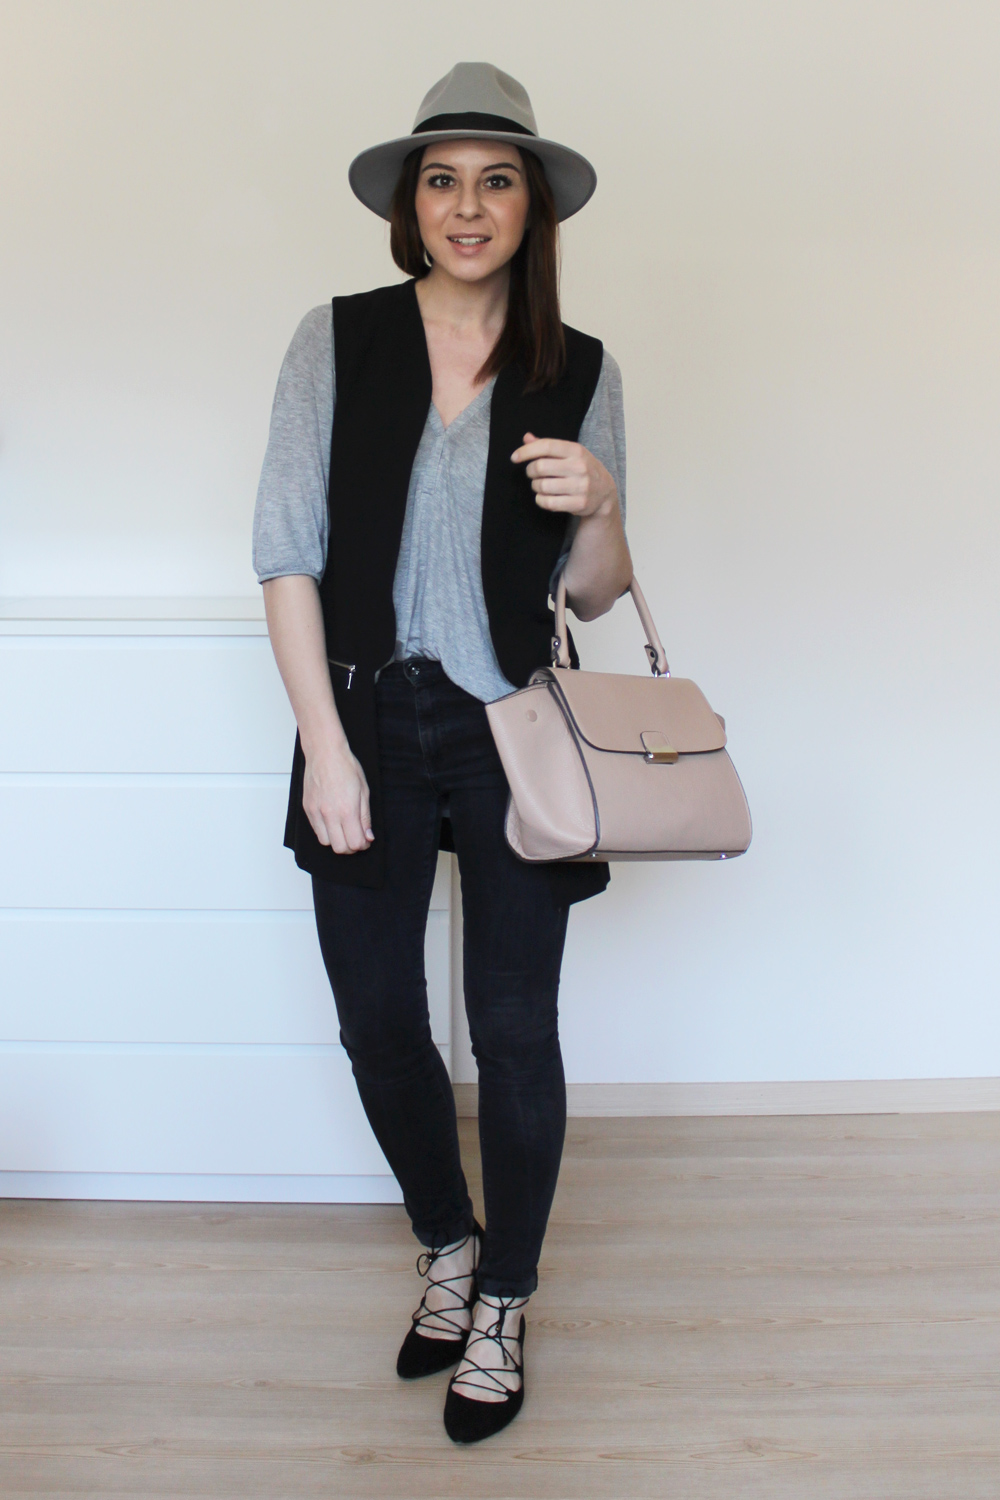 who is mocca, blogger, tirol, outfit, ootd, fashionblogger, weekly wardrobe review, alltagsoutfit, everyday look, inspiration, wie kombiniere ich, how to style, jeans, trapez bag mango, weste asos, strappy ballerinas sarenza aquazzura, whoismocca.com